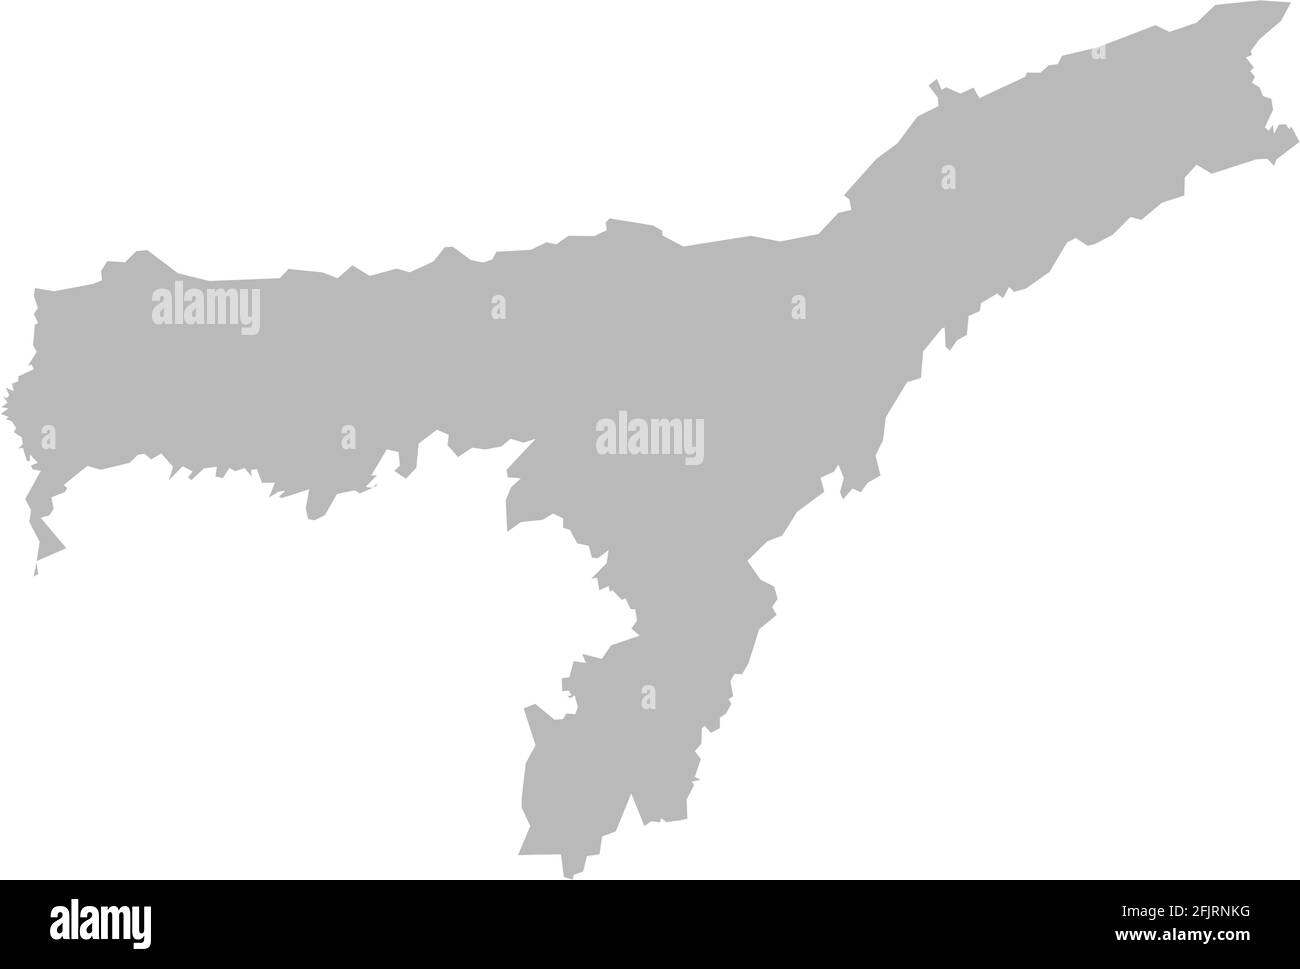 Assam indian state map. Light gray background. Business concepts graphics design. Stock Vector